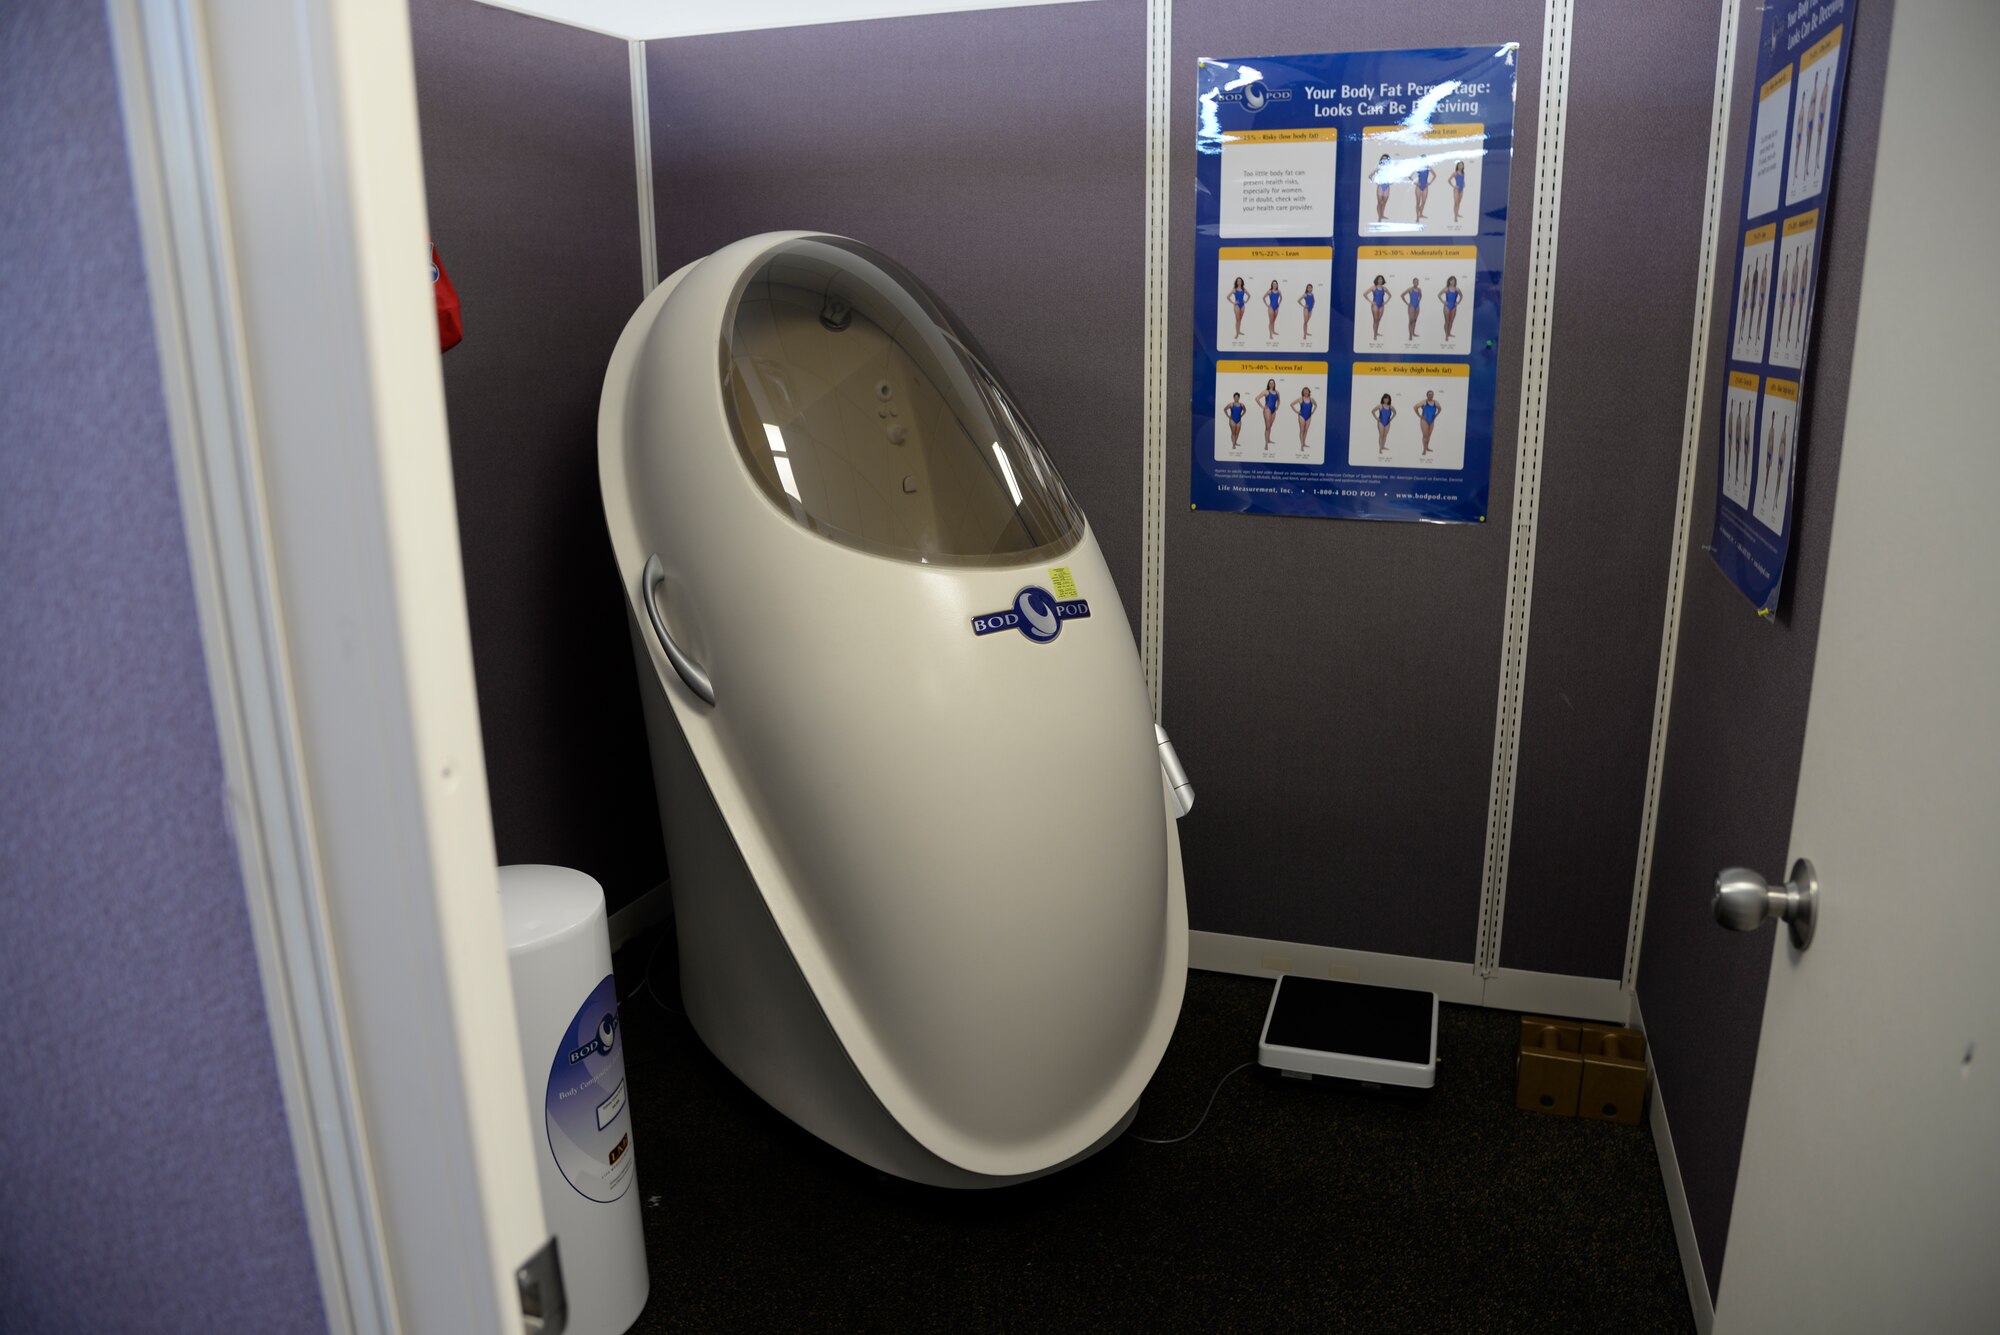 The BOD POD is used to assess and track body composition using precise air displacement technology. If you would like to schedule an appointment to use the BOD POD you can contact the HAWC at (813)-828-4739. (Photo by Trevor Godbolt)